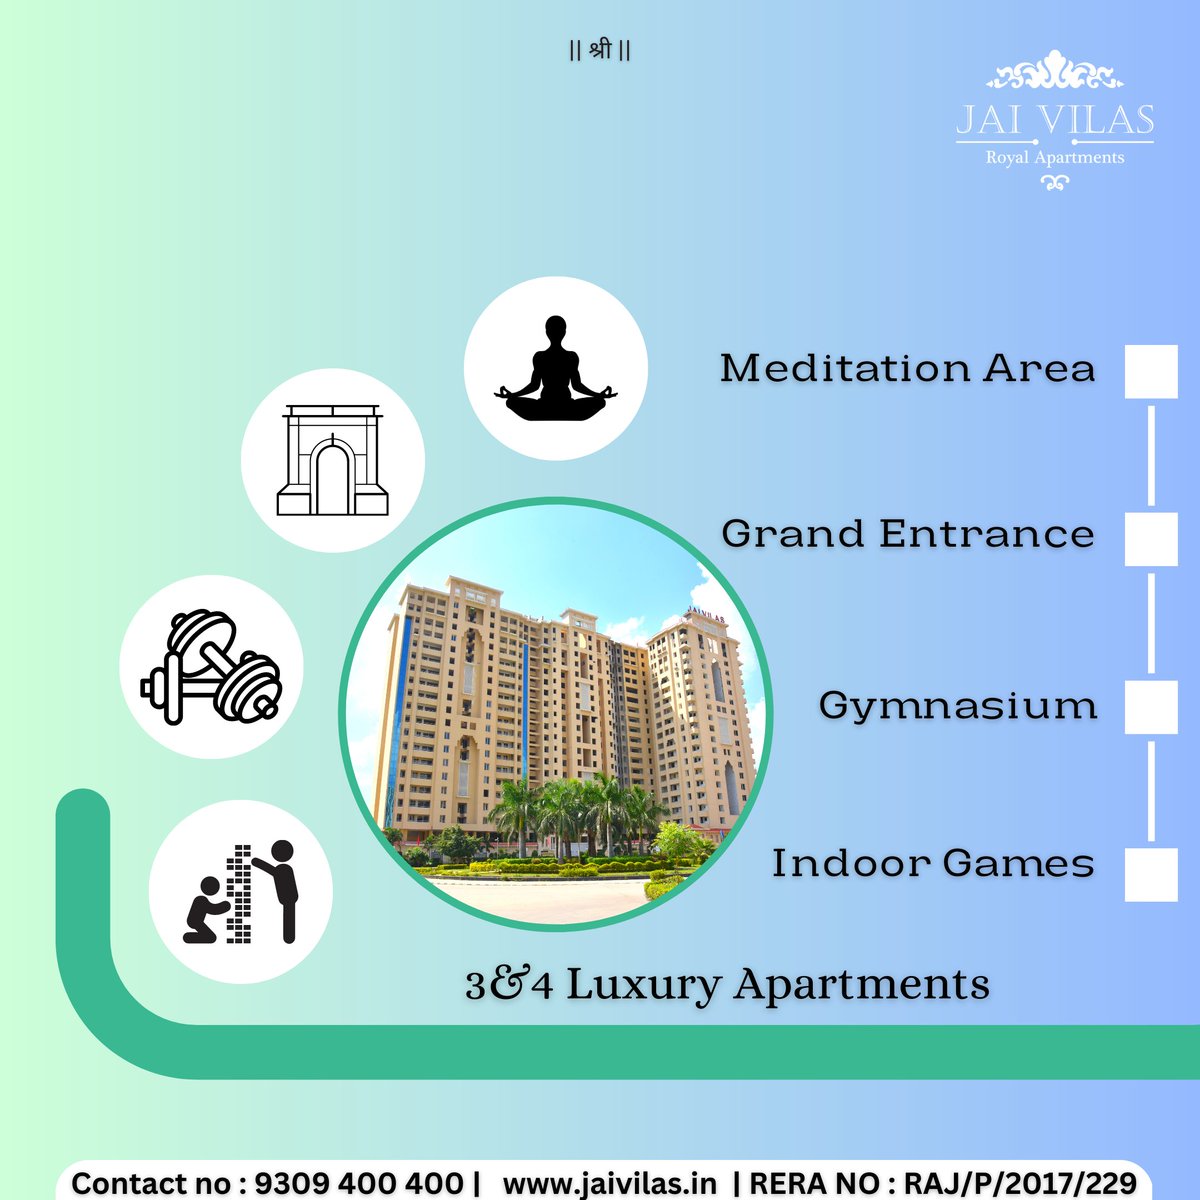 For more details contact: +91-9309400400
Visit- jaivilas.in
#ExperienceLiving #Amenities #LivingTogether #HappyCommunities #flatsinjaipur #LuxuryTownship #flatswithamenities #SpaciousFlats #realestate #ResidentialTownship #residentalflats #luxuryflats